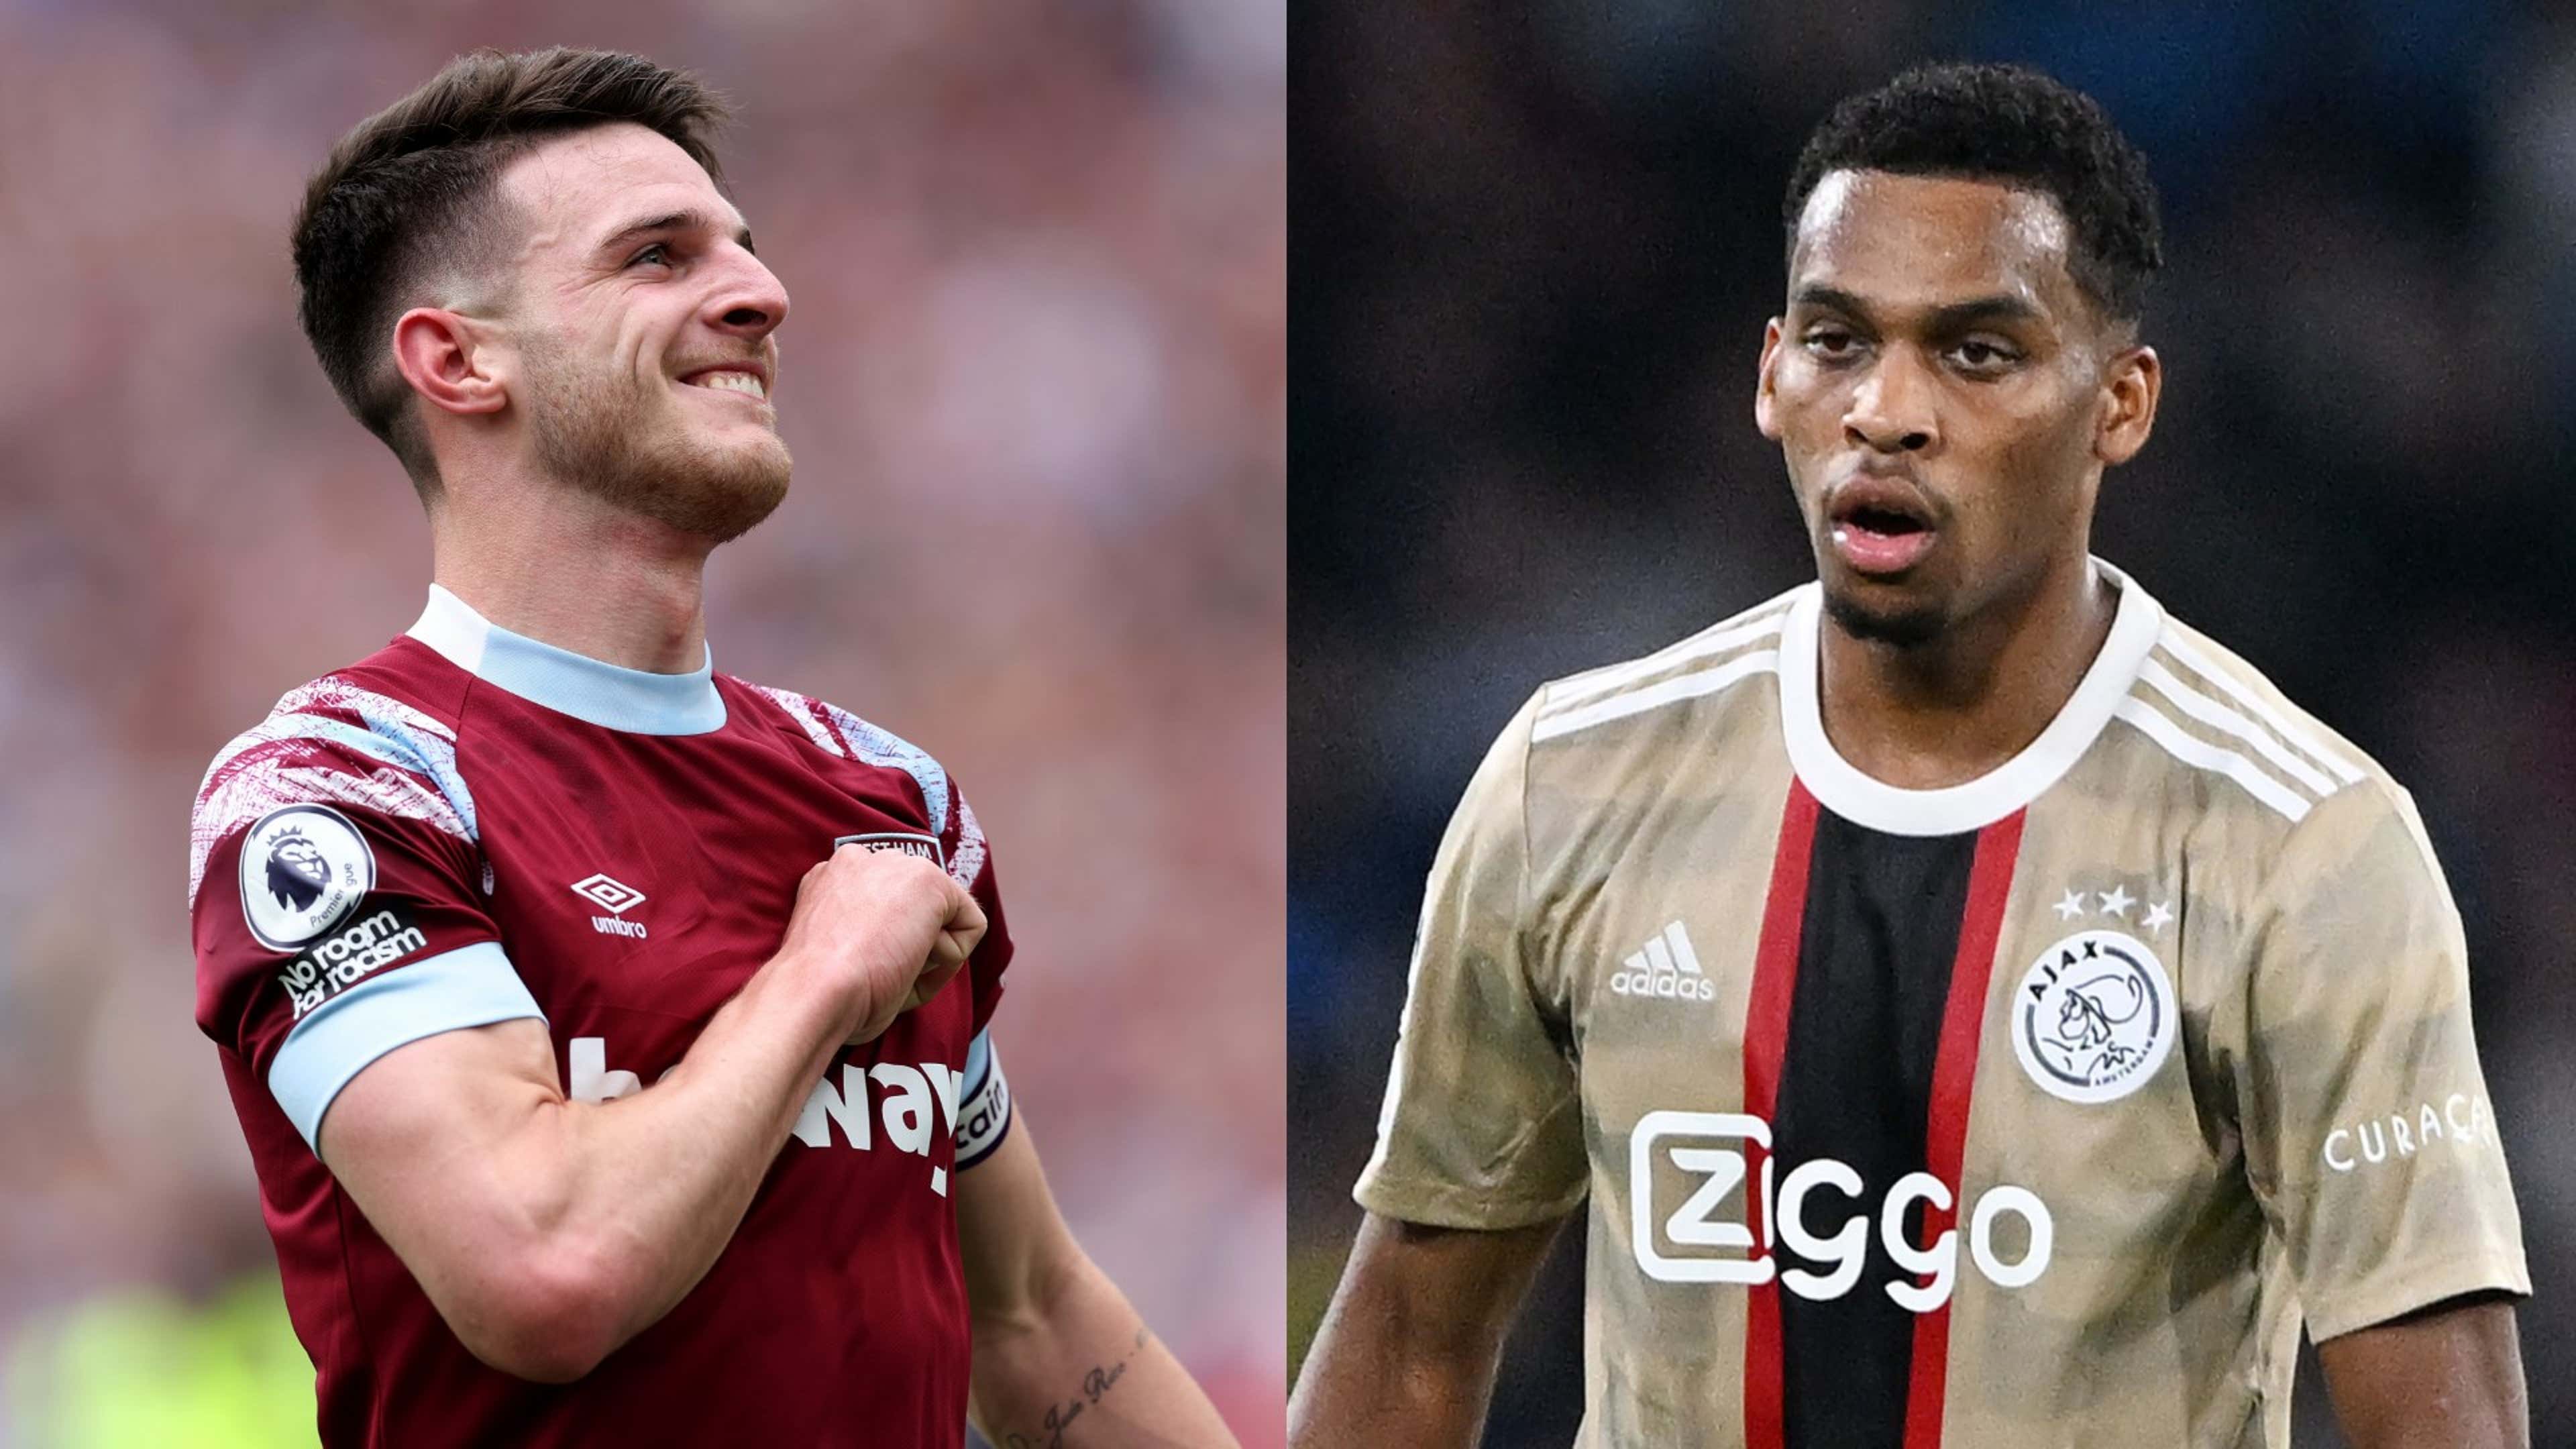 Arsenal Is Yet To Confirm Declan Rice And Jurrien Timber's Signings To The Emirates Stadium